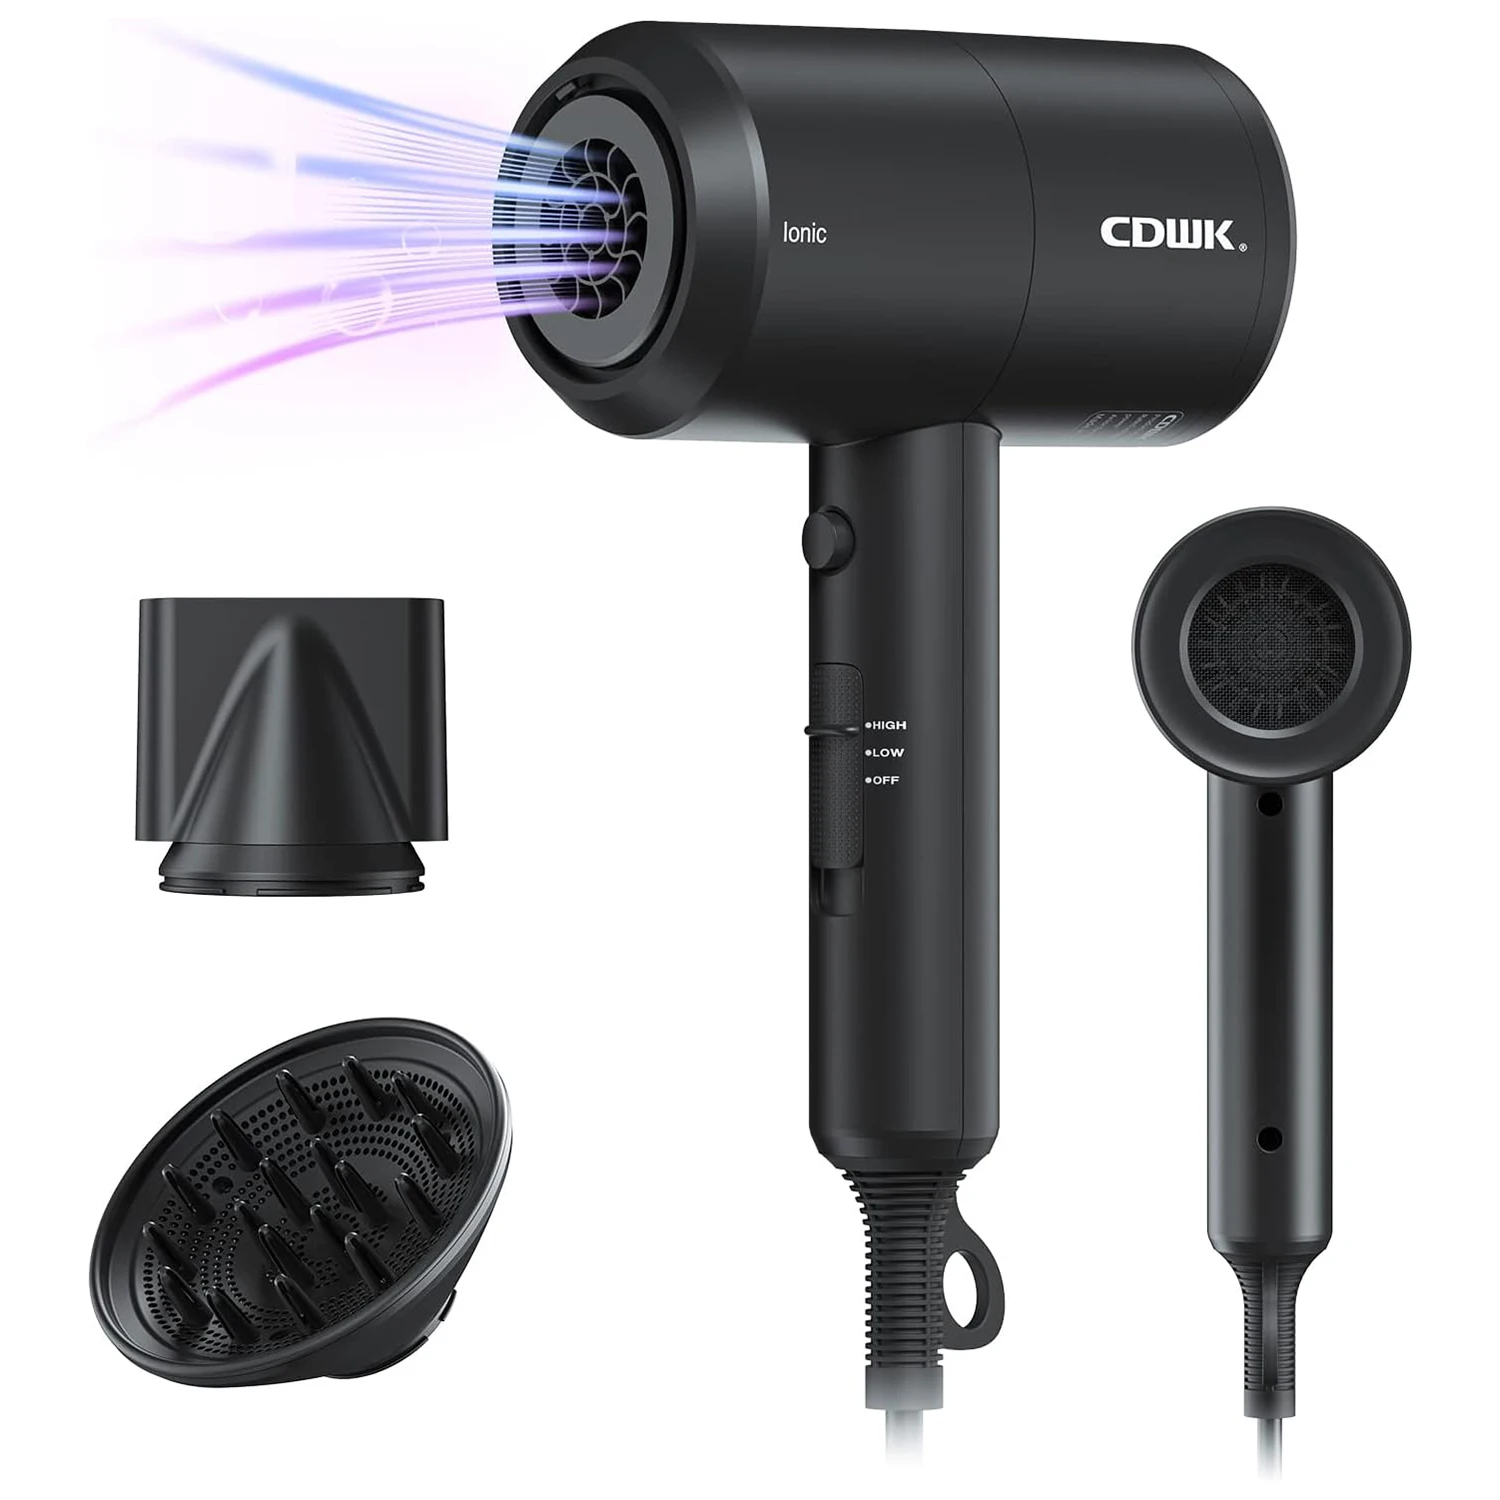 Professional Ionic Negative Hair Dryer with Diffuser 1800W Fast Drying Hair Dryers for Curly Straight Hair Travel Portable xiaomi jimmy f6 hair dryer 220v 1800w electric portable negative ion noise reducing eu plug starlight purple